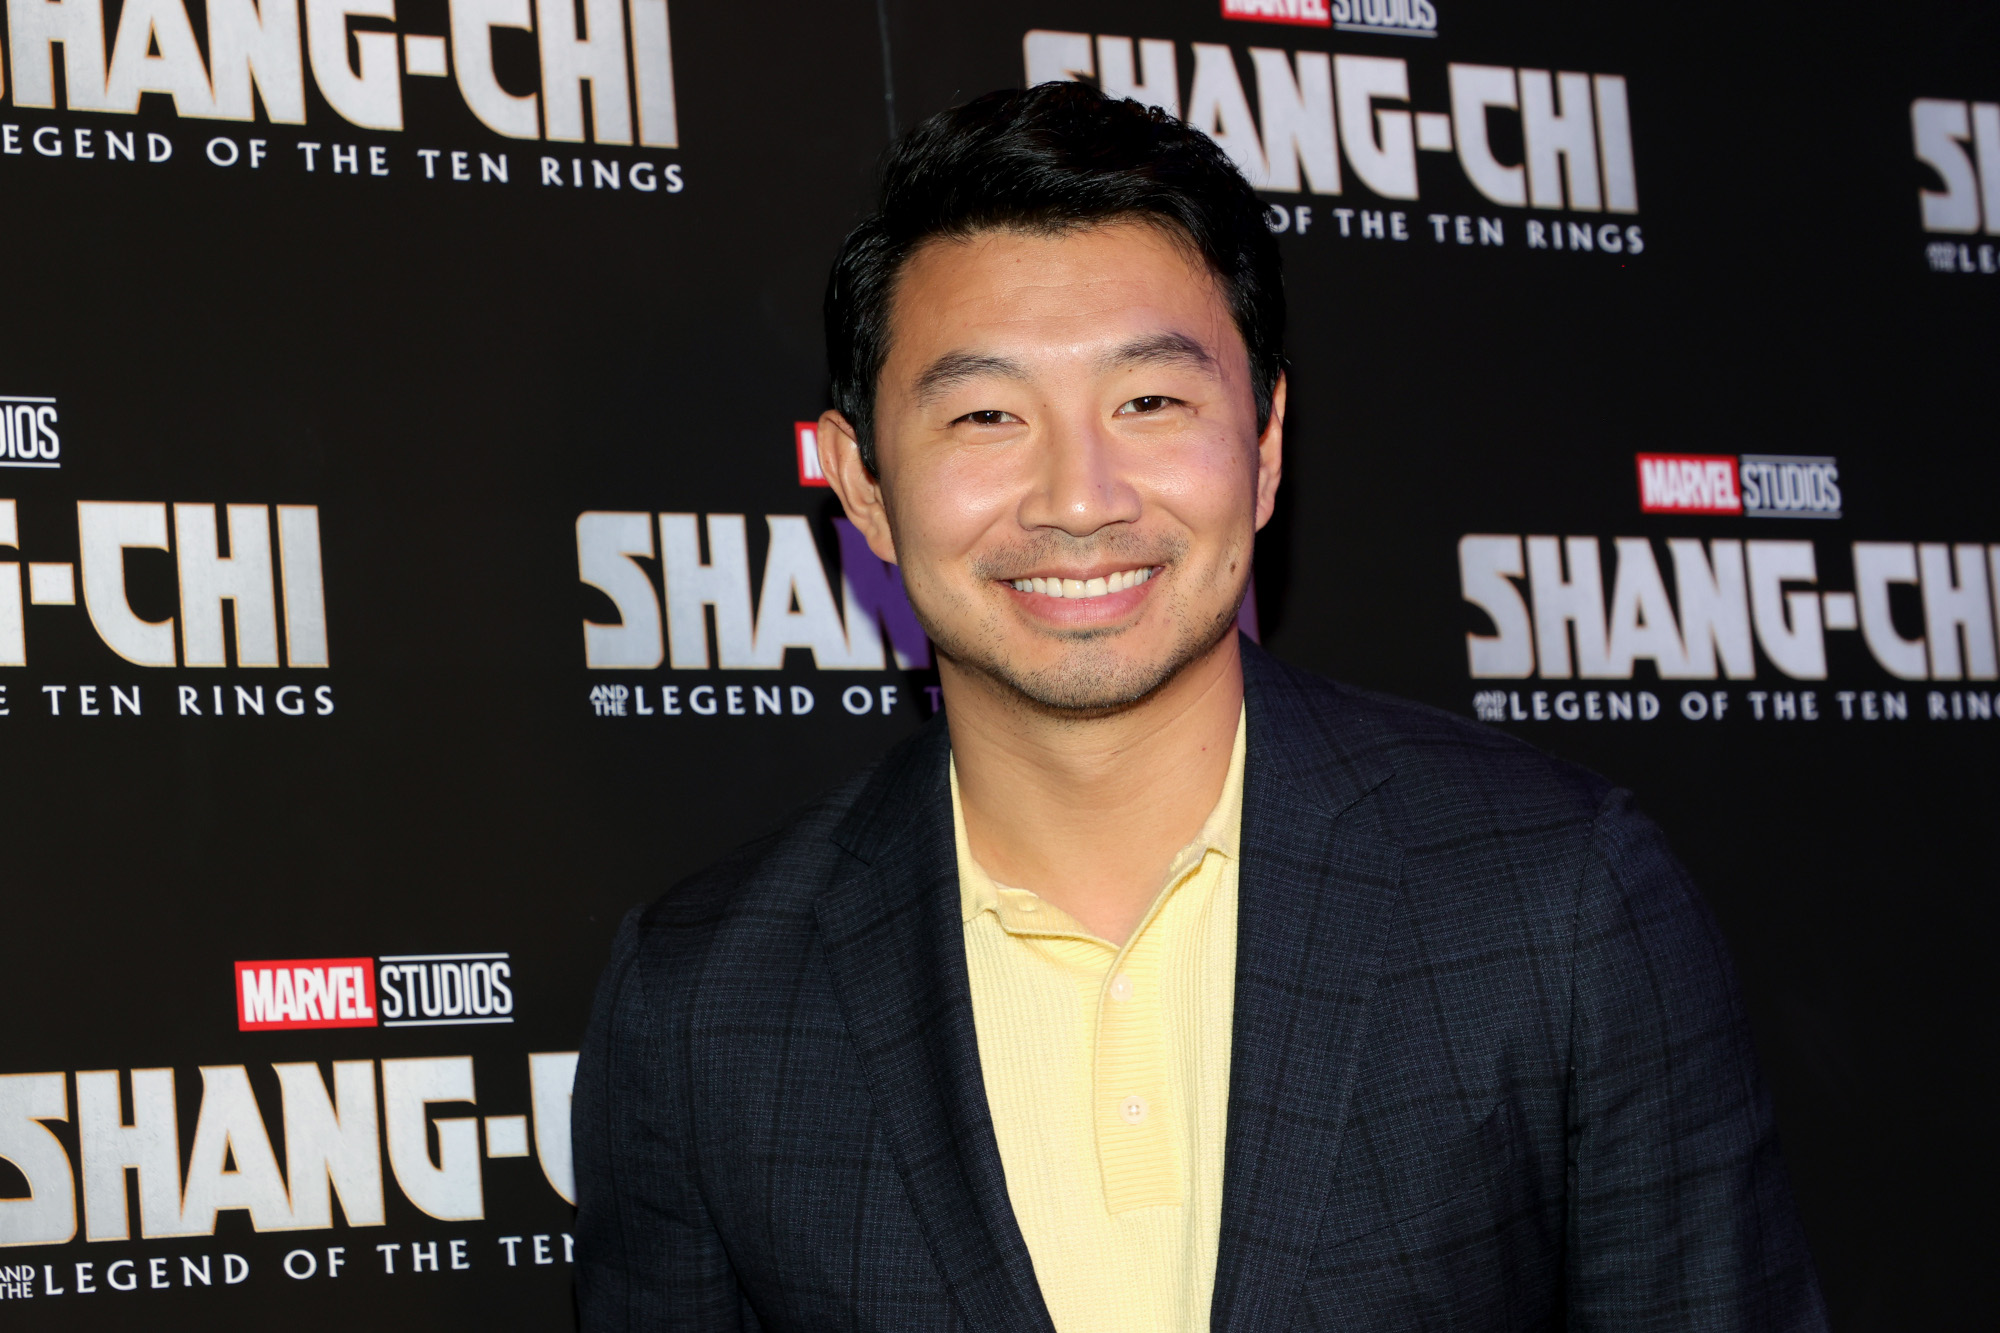 Simu Liu at the premiere for Marvel's 'Shang-Chi and the Legend of the Ten Rings.' He's wearing a yellow button-up shirt and black suit. He's smiling at the camera. For our article about how long the film is, here's the runtime.